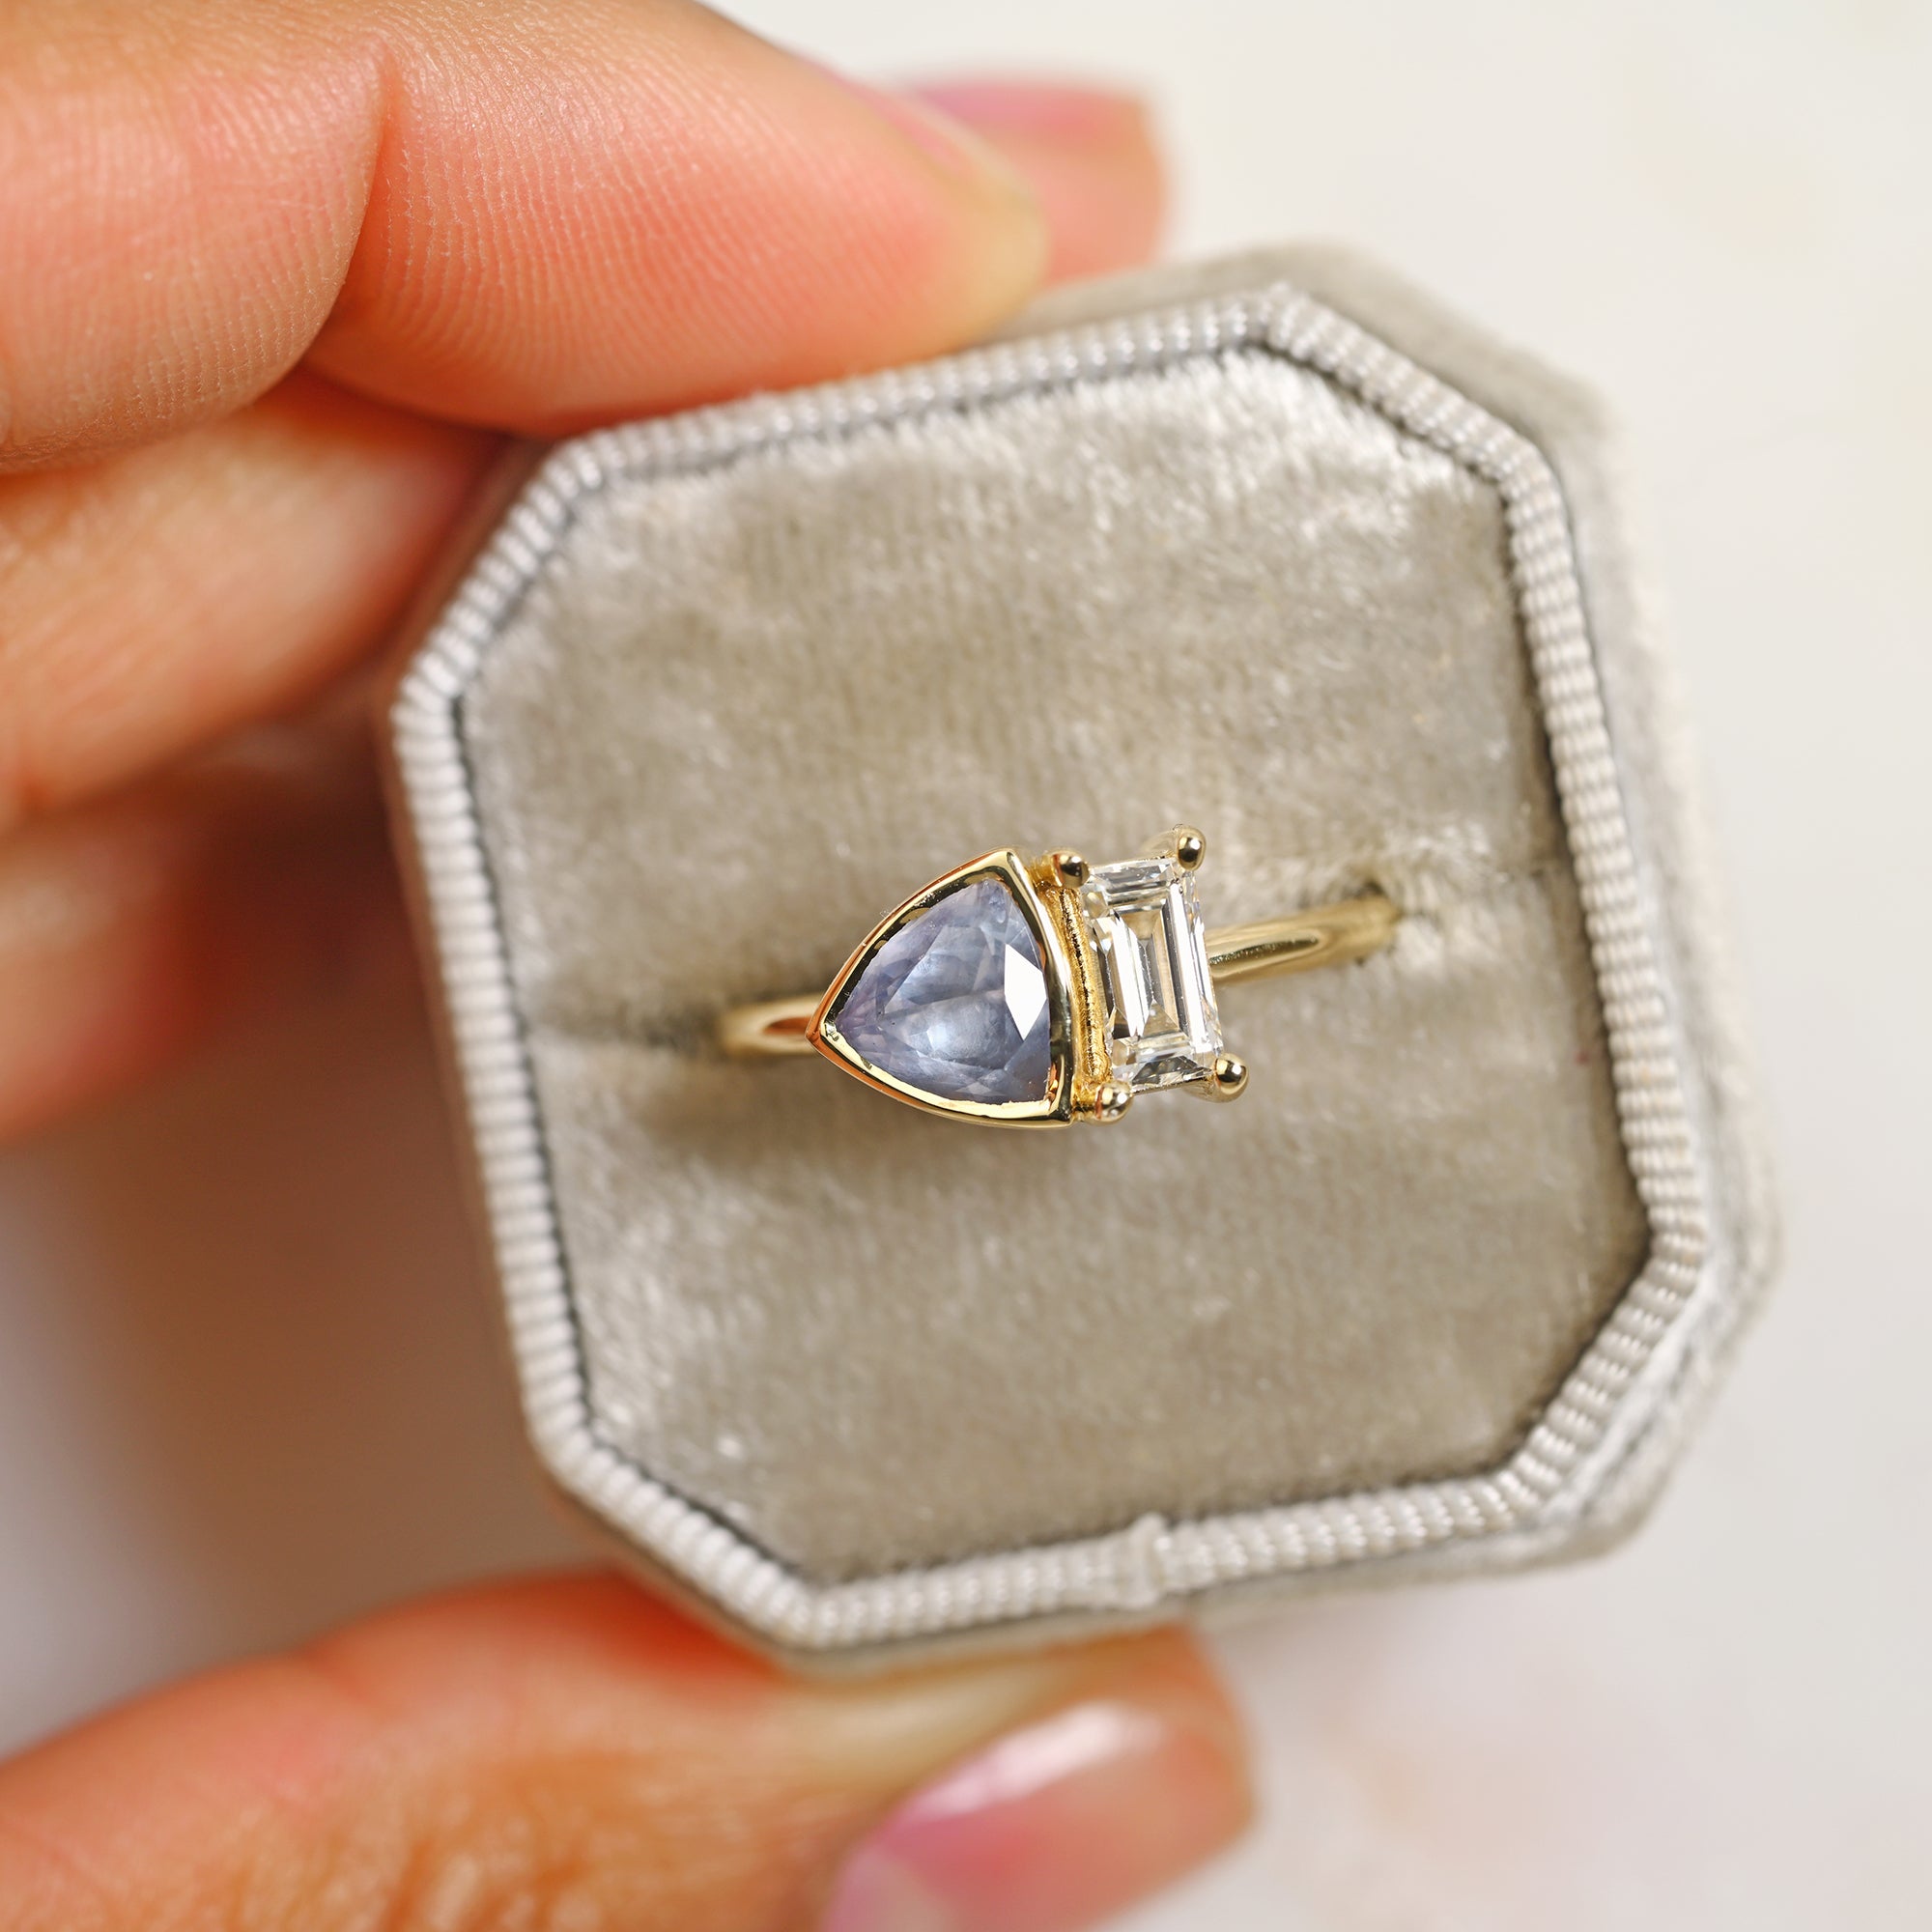 Toi-et-moi baguette diamond and light blue Montana sapphire engagement ring set in 14k yellow gold in a gray ring box